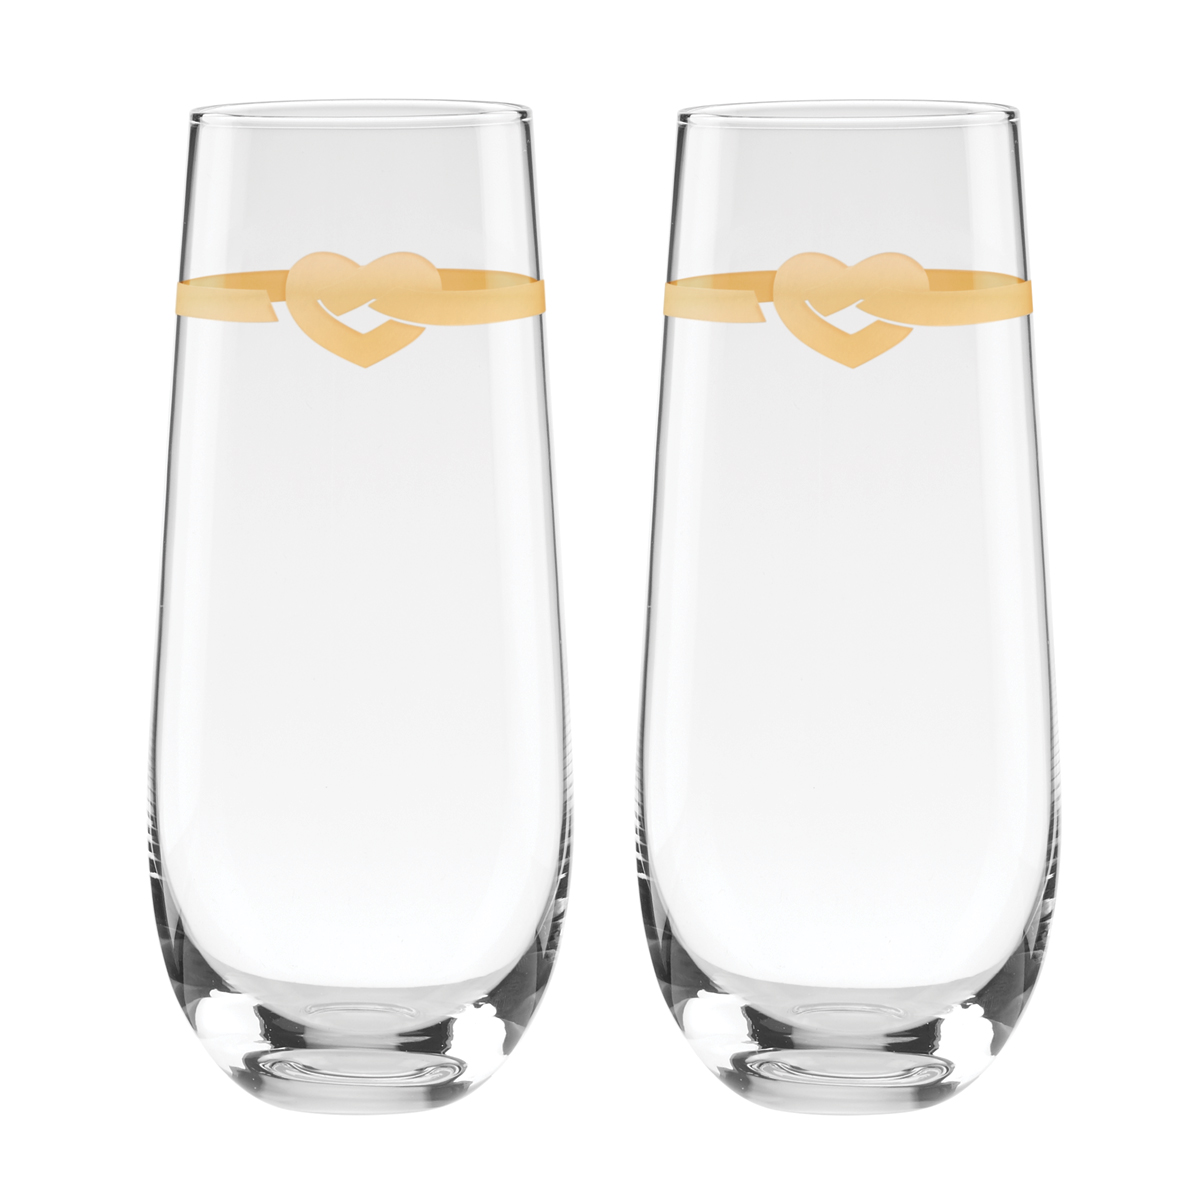 Kate Spade New York, Lenox With Love Stemless Flutes Pair